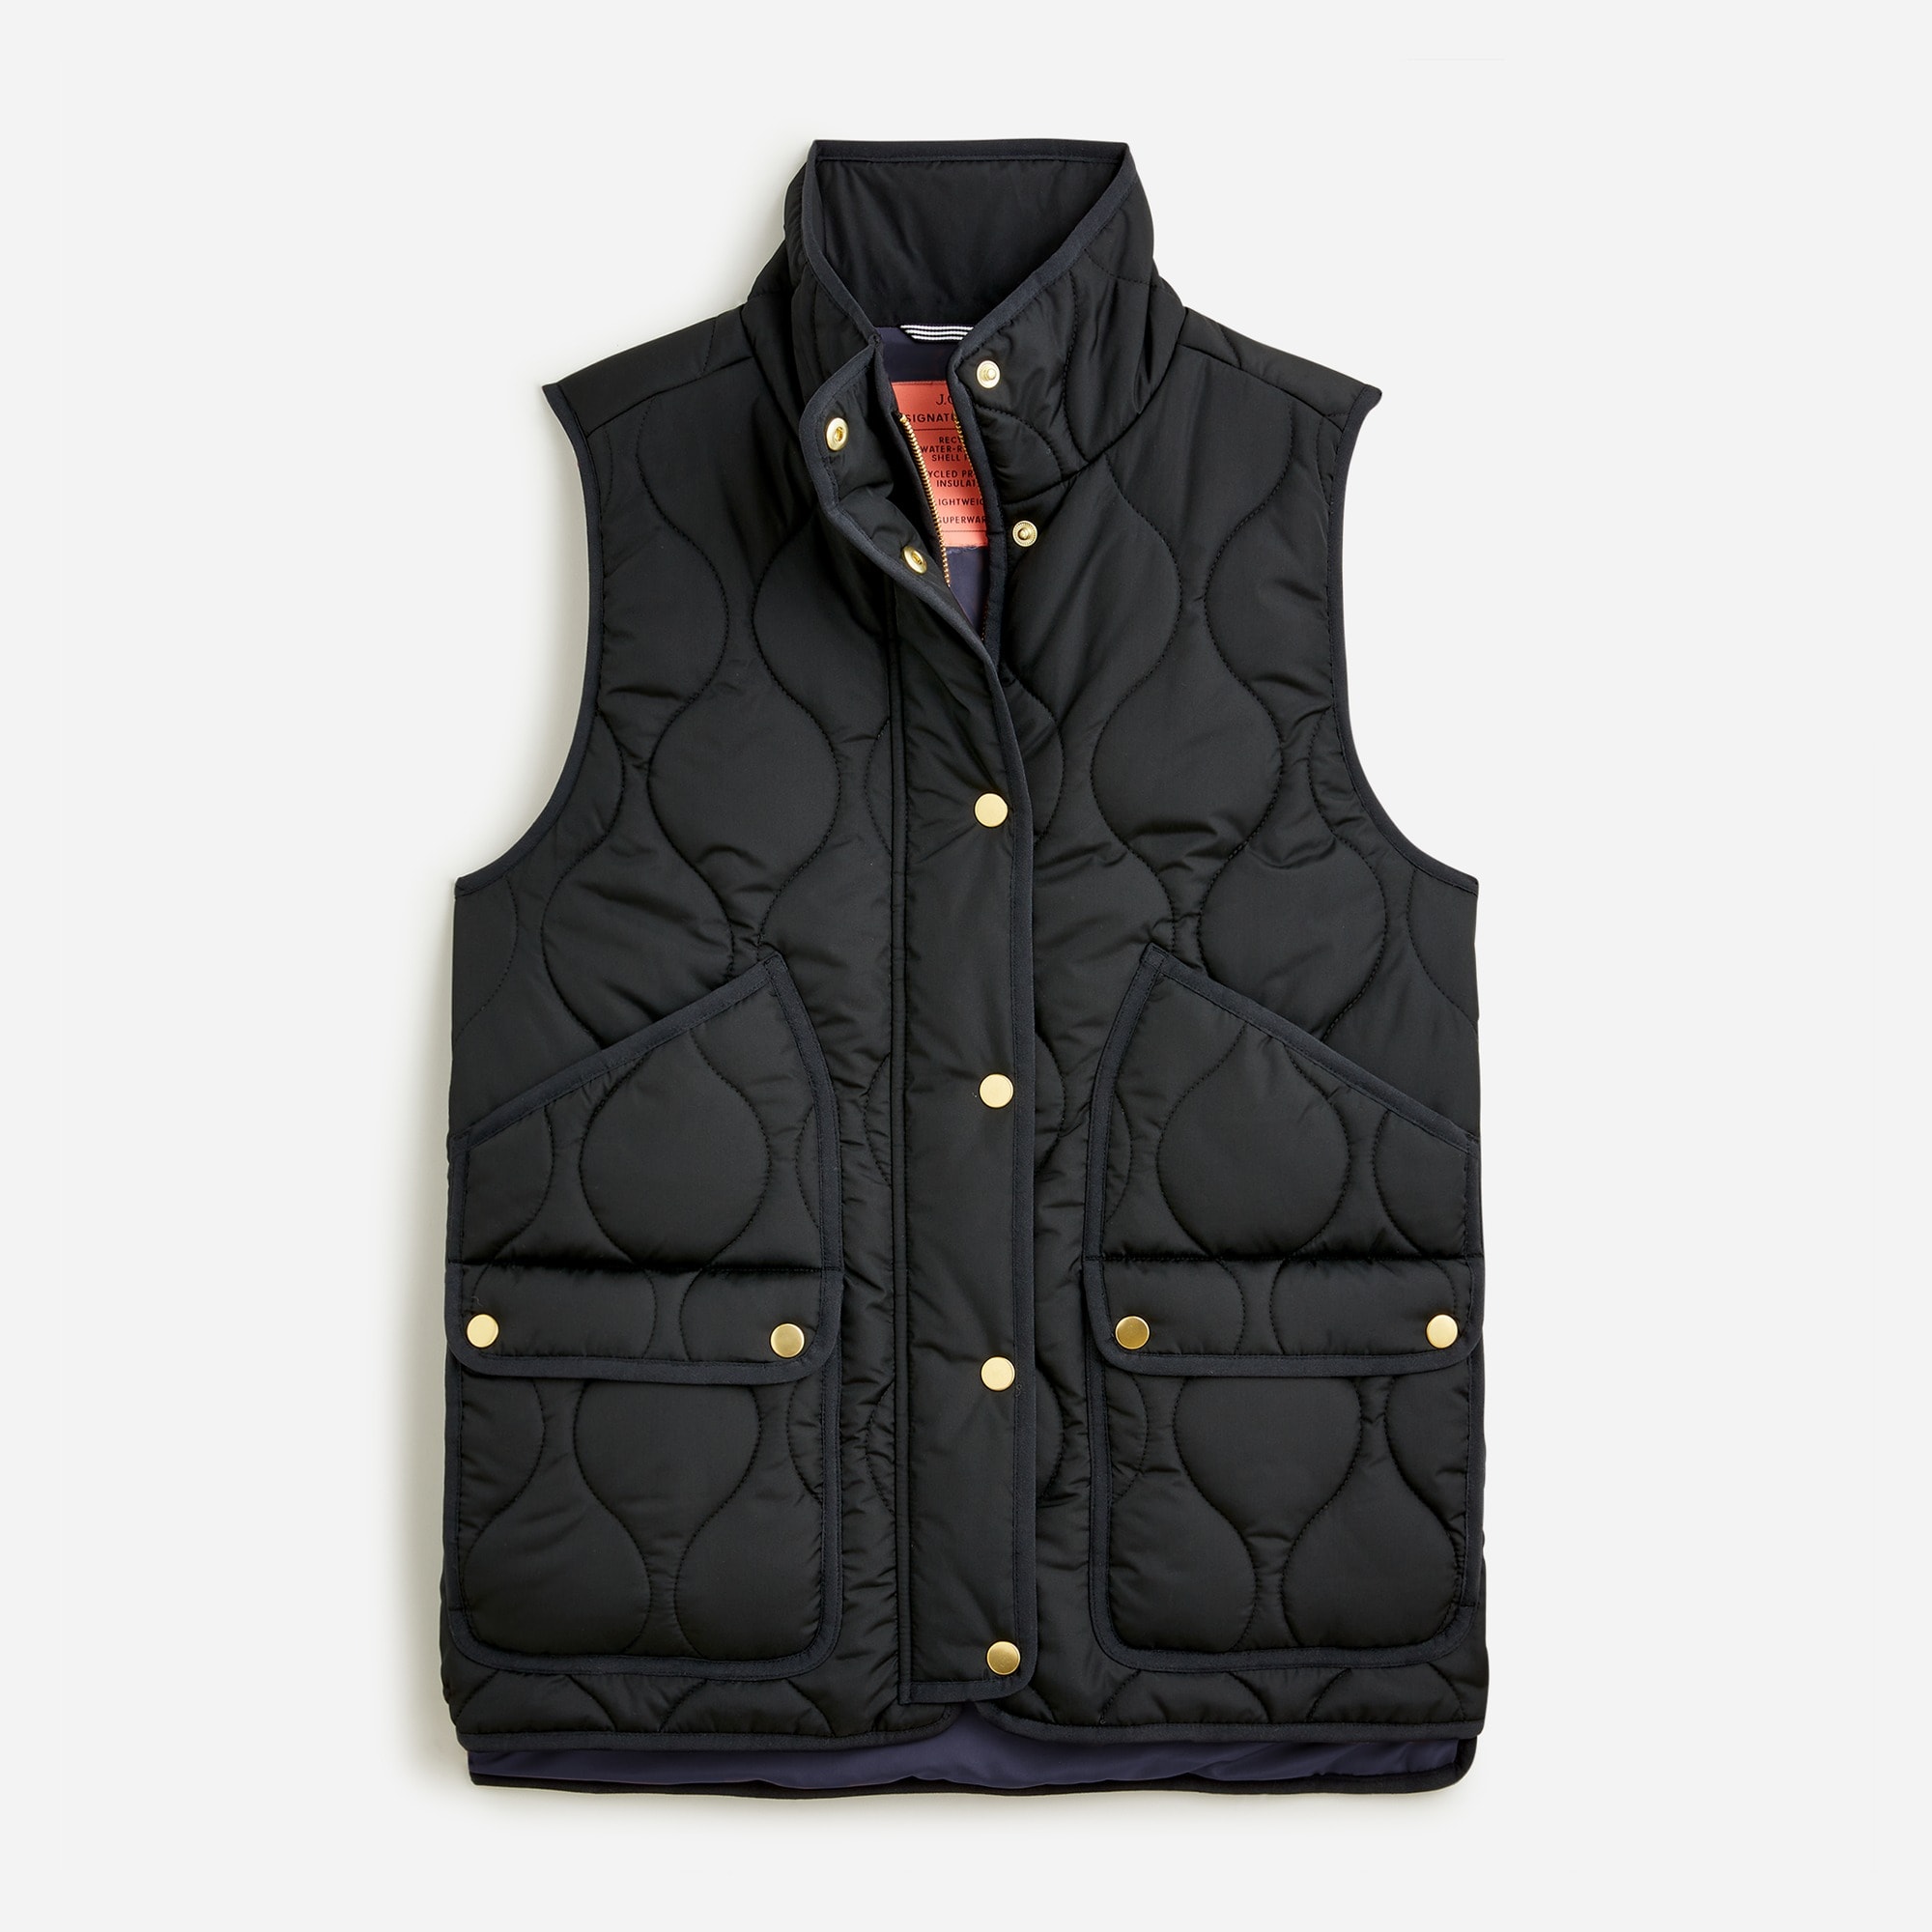  New quilted excursion vest